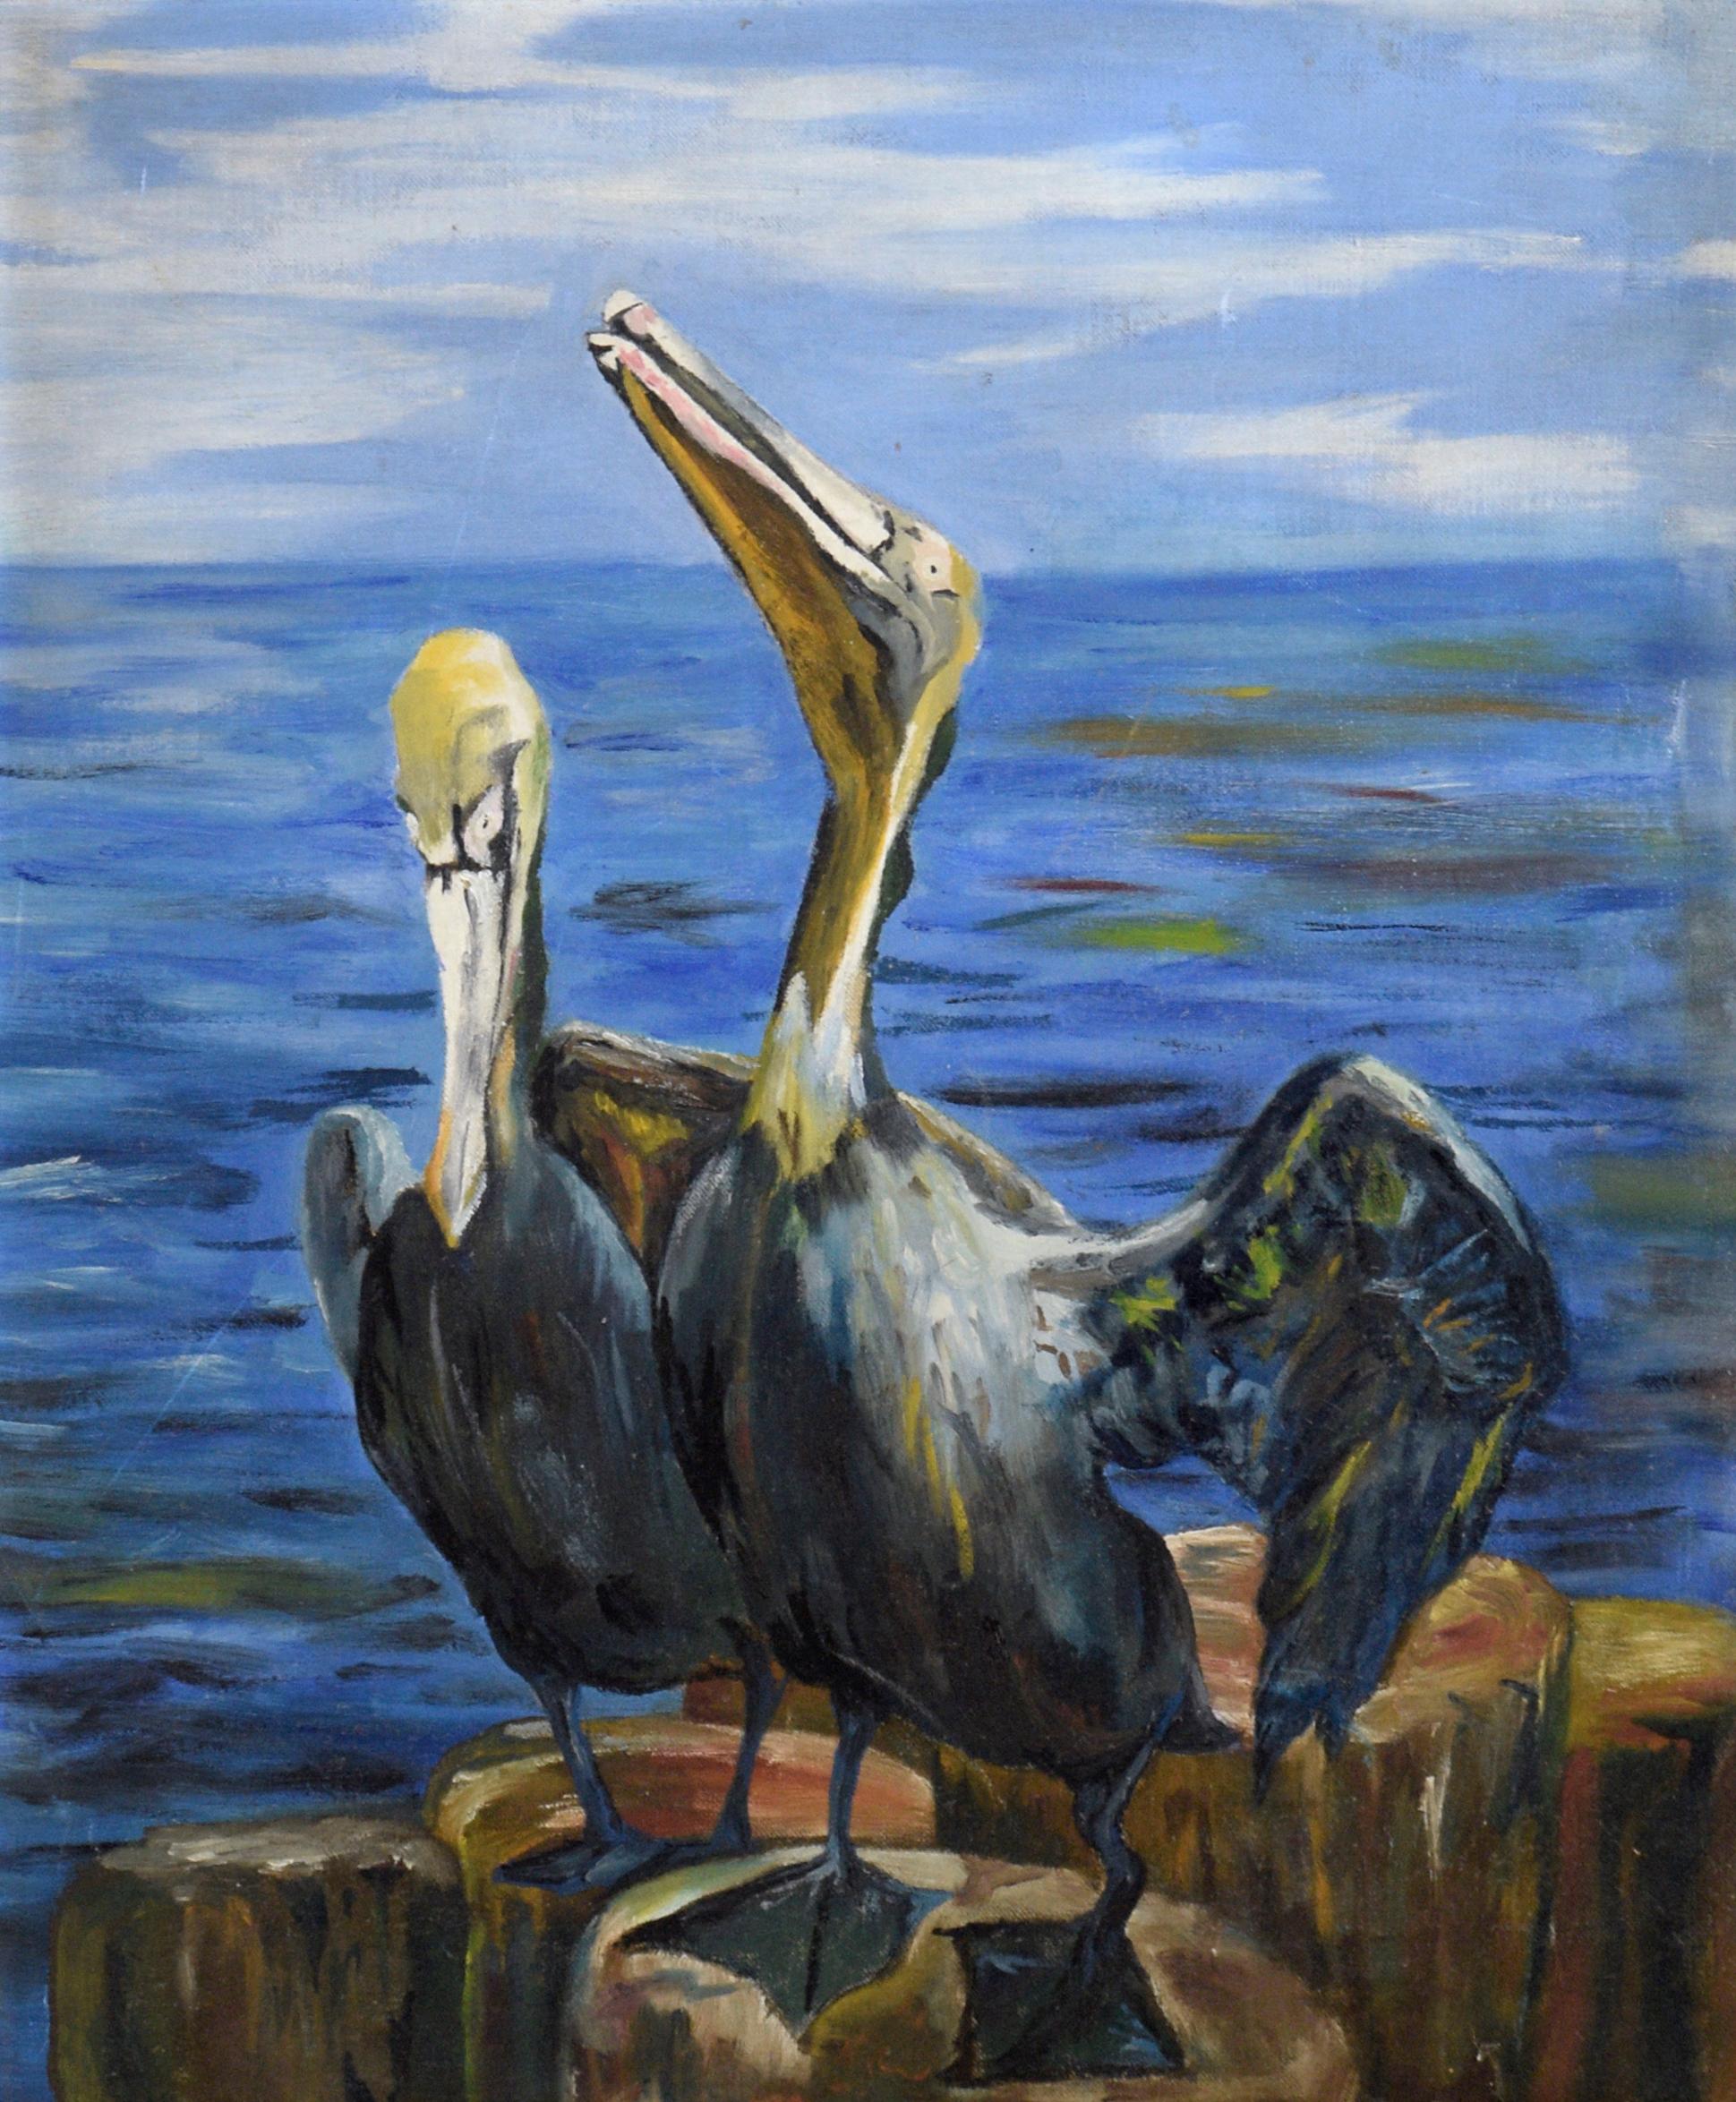 Perched Pelicans by the Ocean - Oil on Canvas - Painting by Unknown